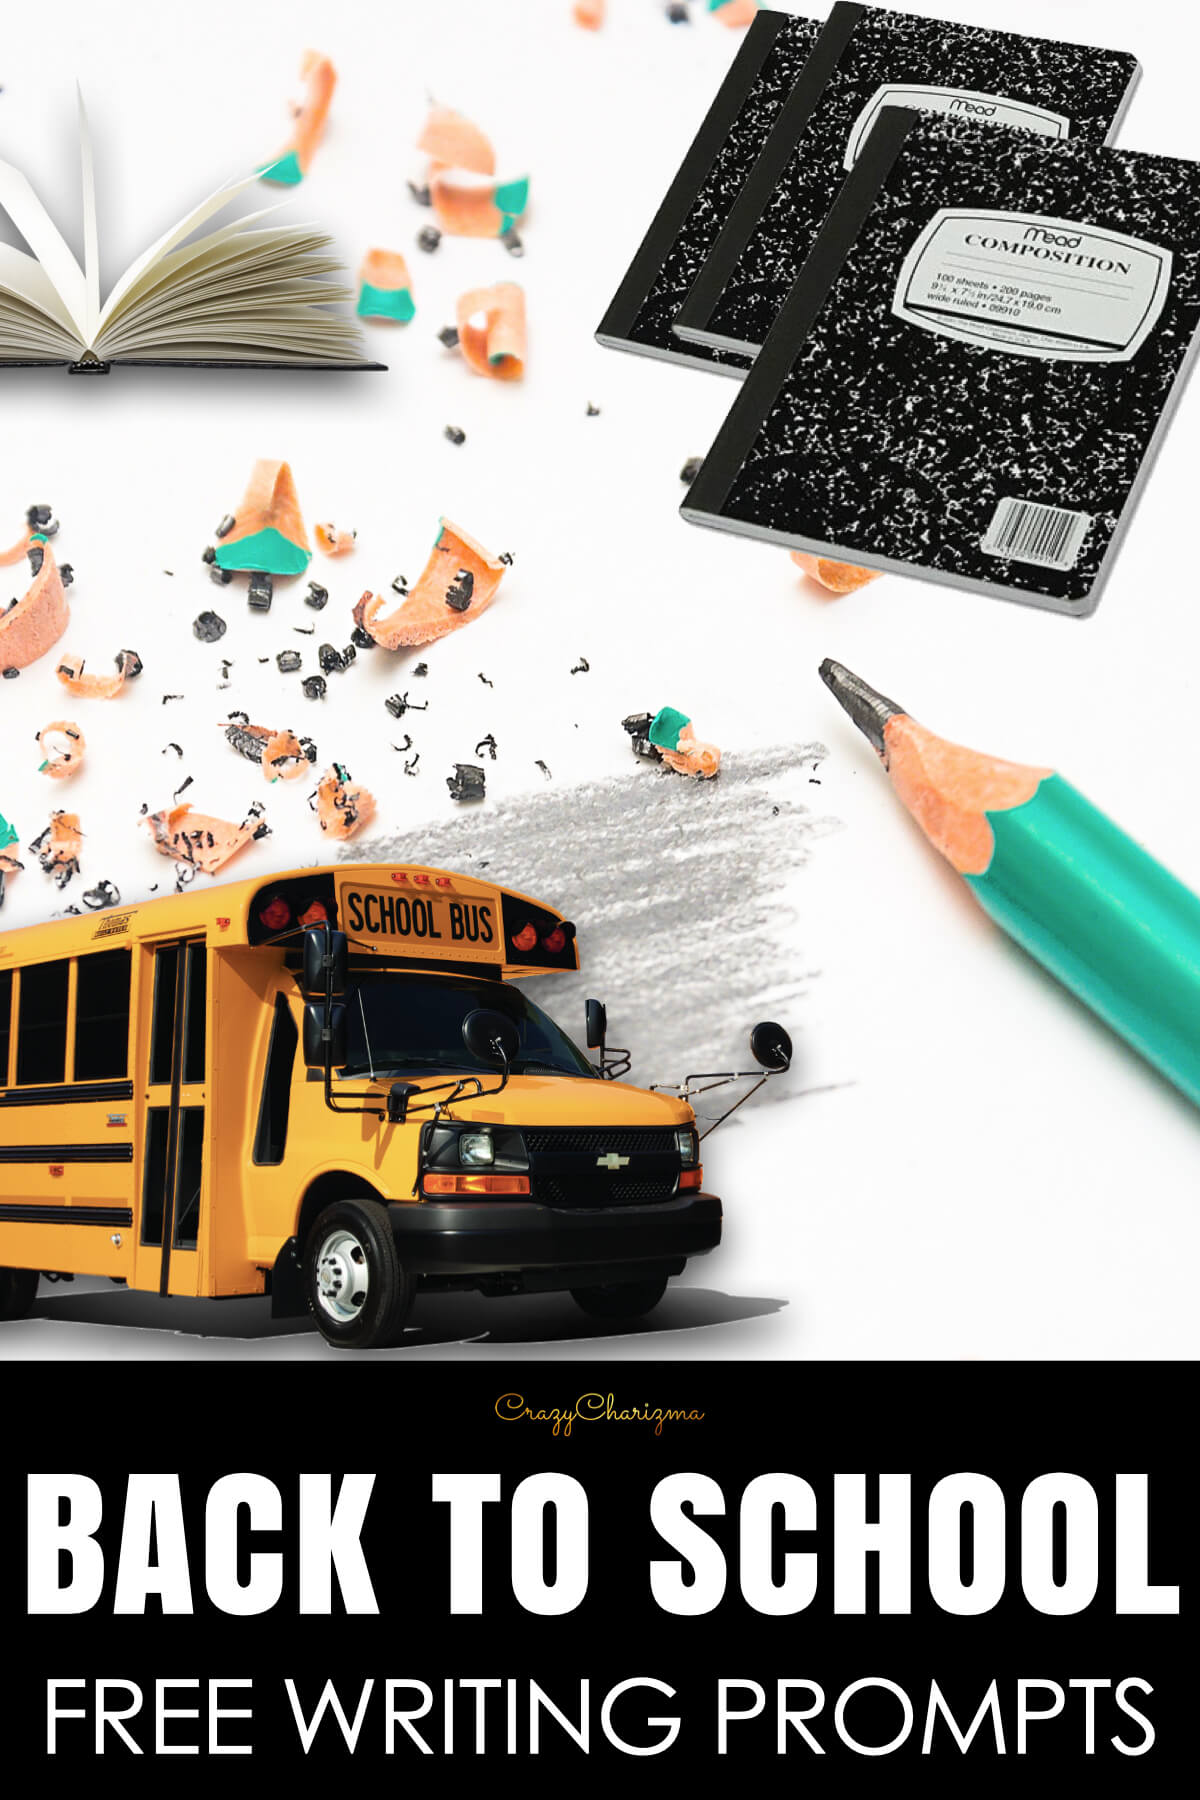 Discover captivating back-to-school writing prompts! Download our free set of narrative, informational, and opinion prompts for middle school. Ignite creativity and engagement from day one!